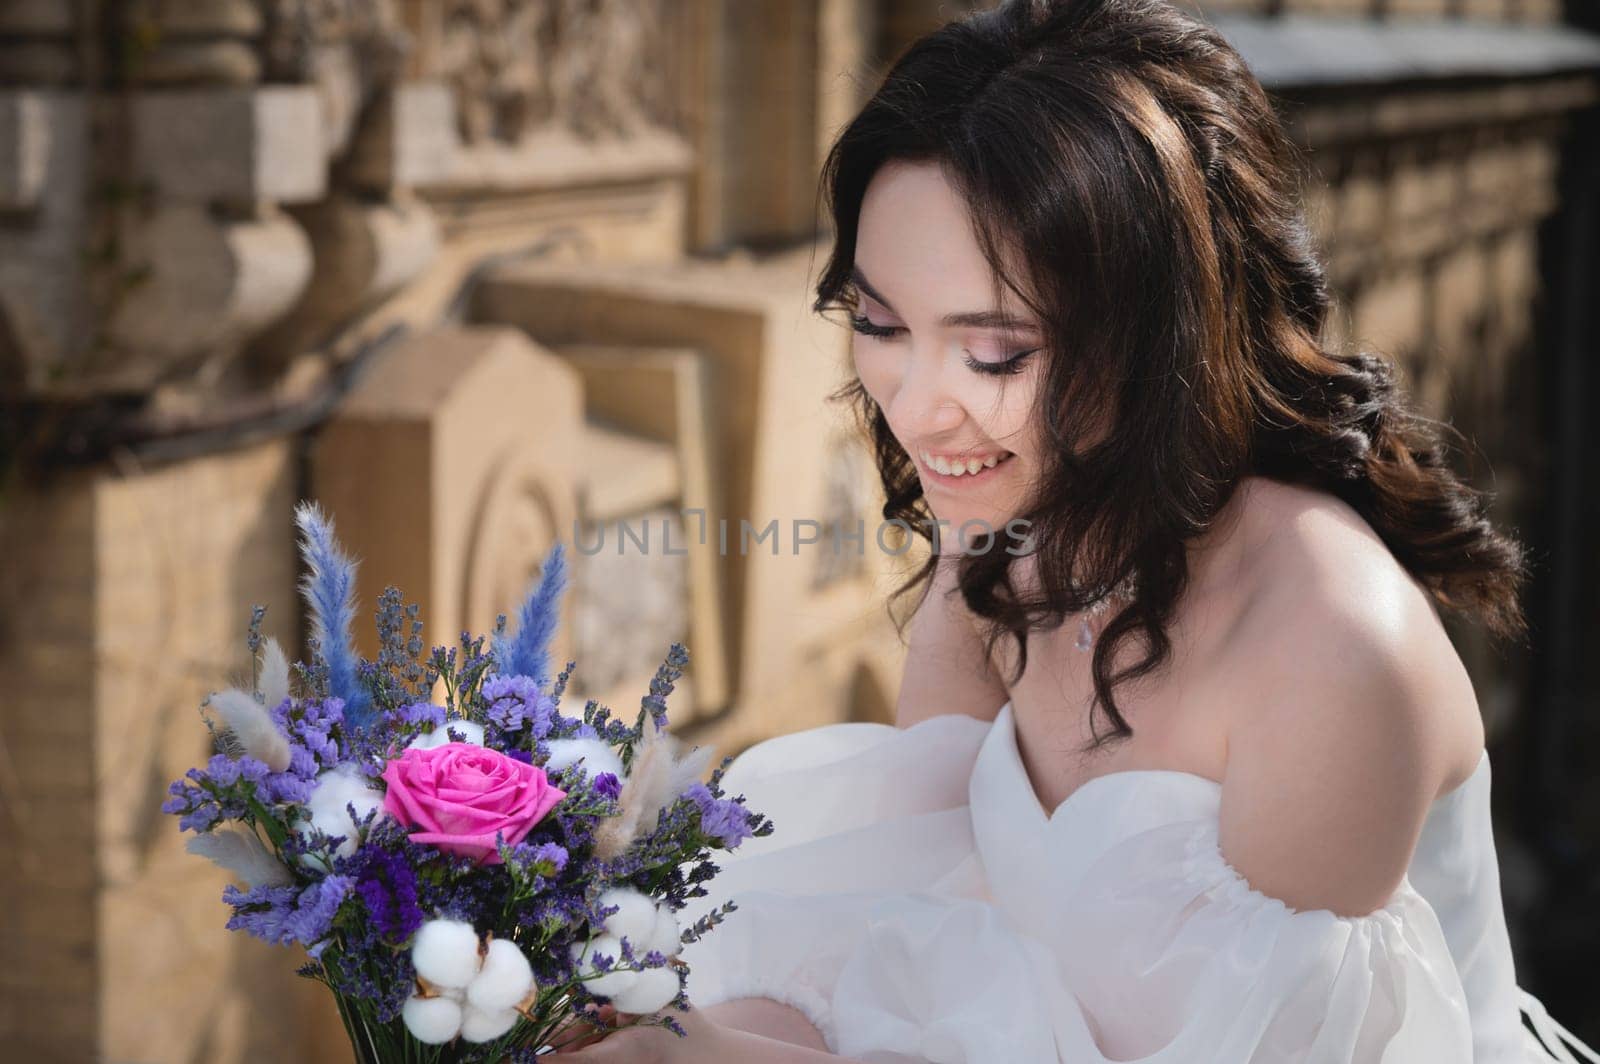 Stunning young bride with bouquet, portrait of smiling bride, happiness, wedding.